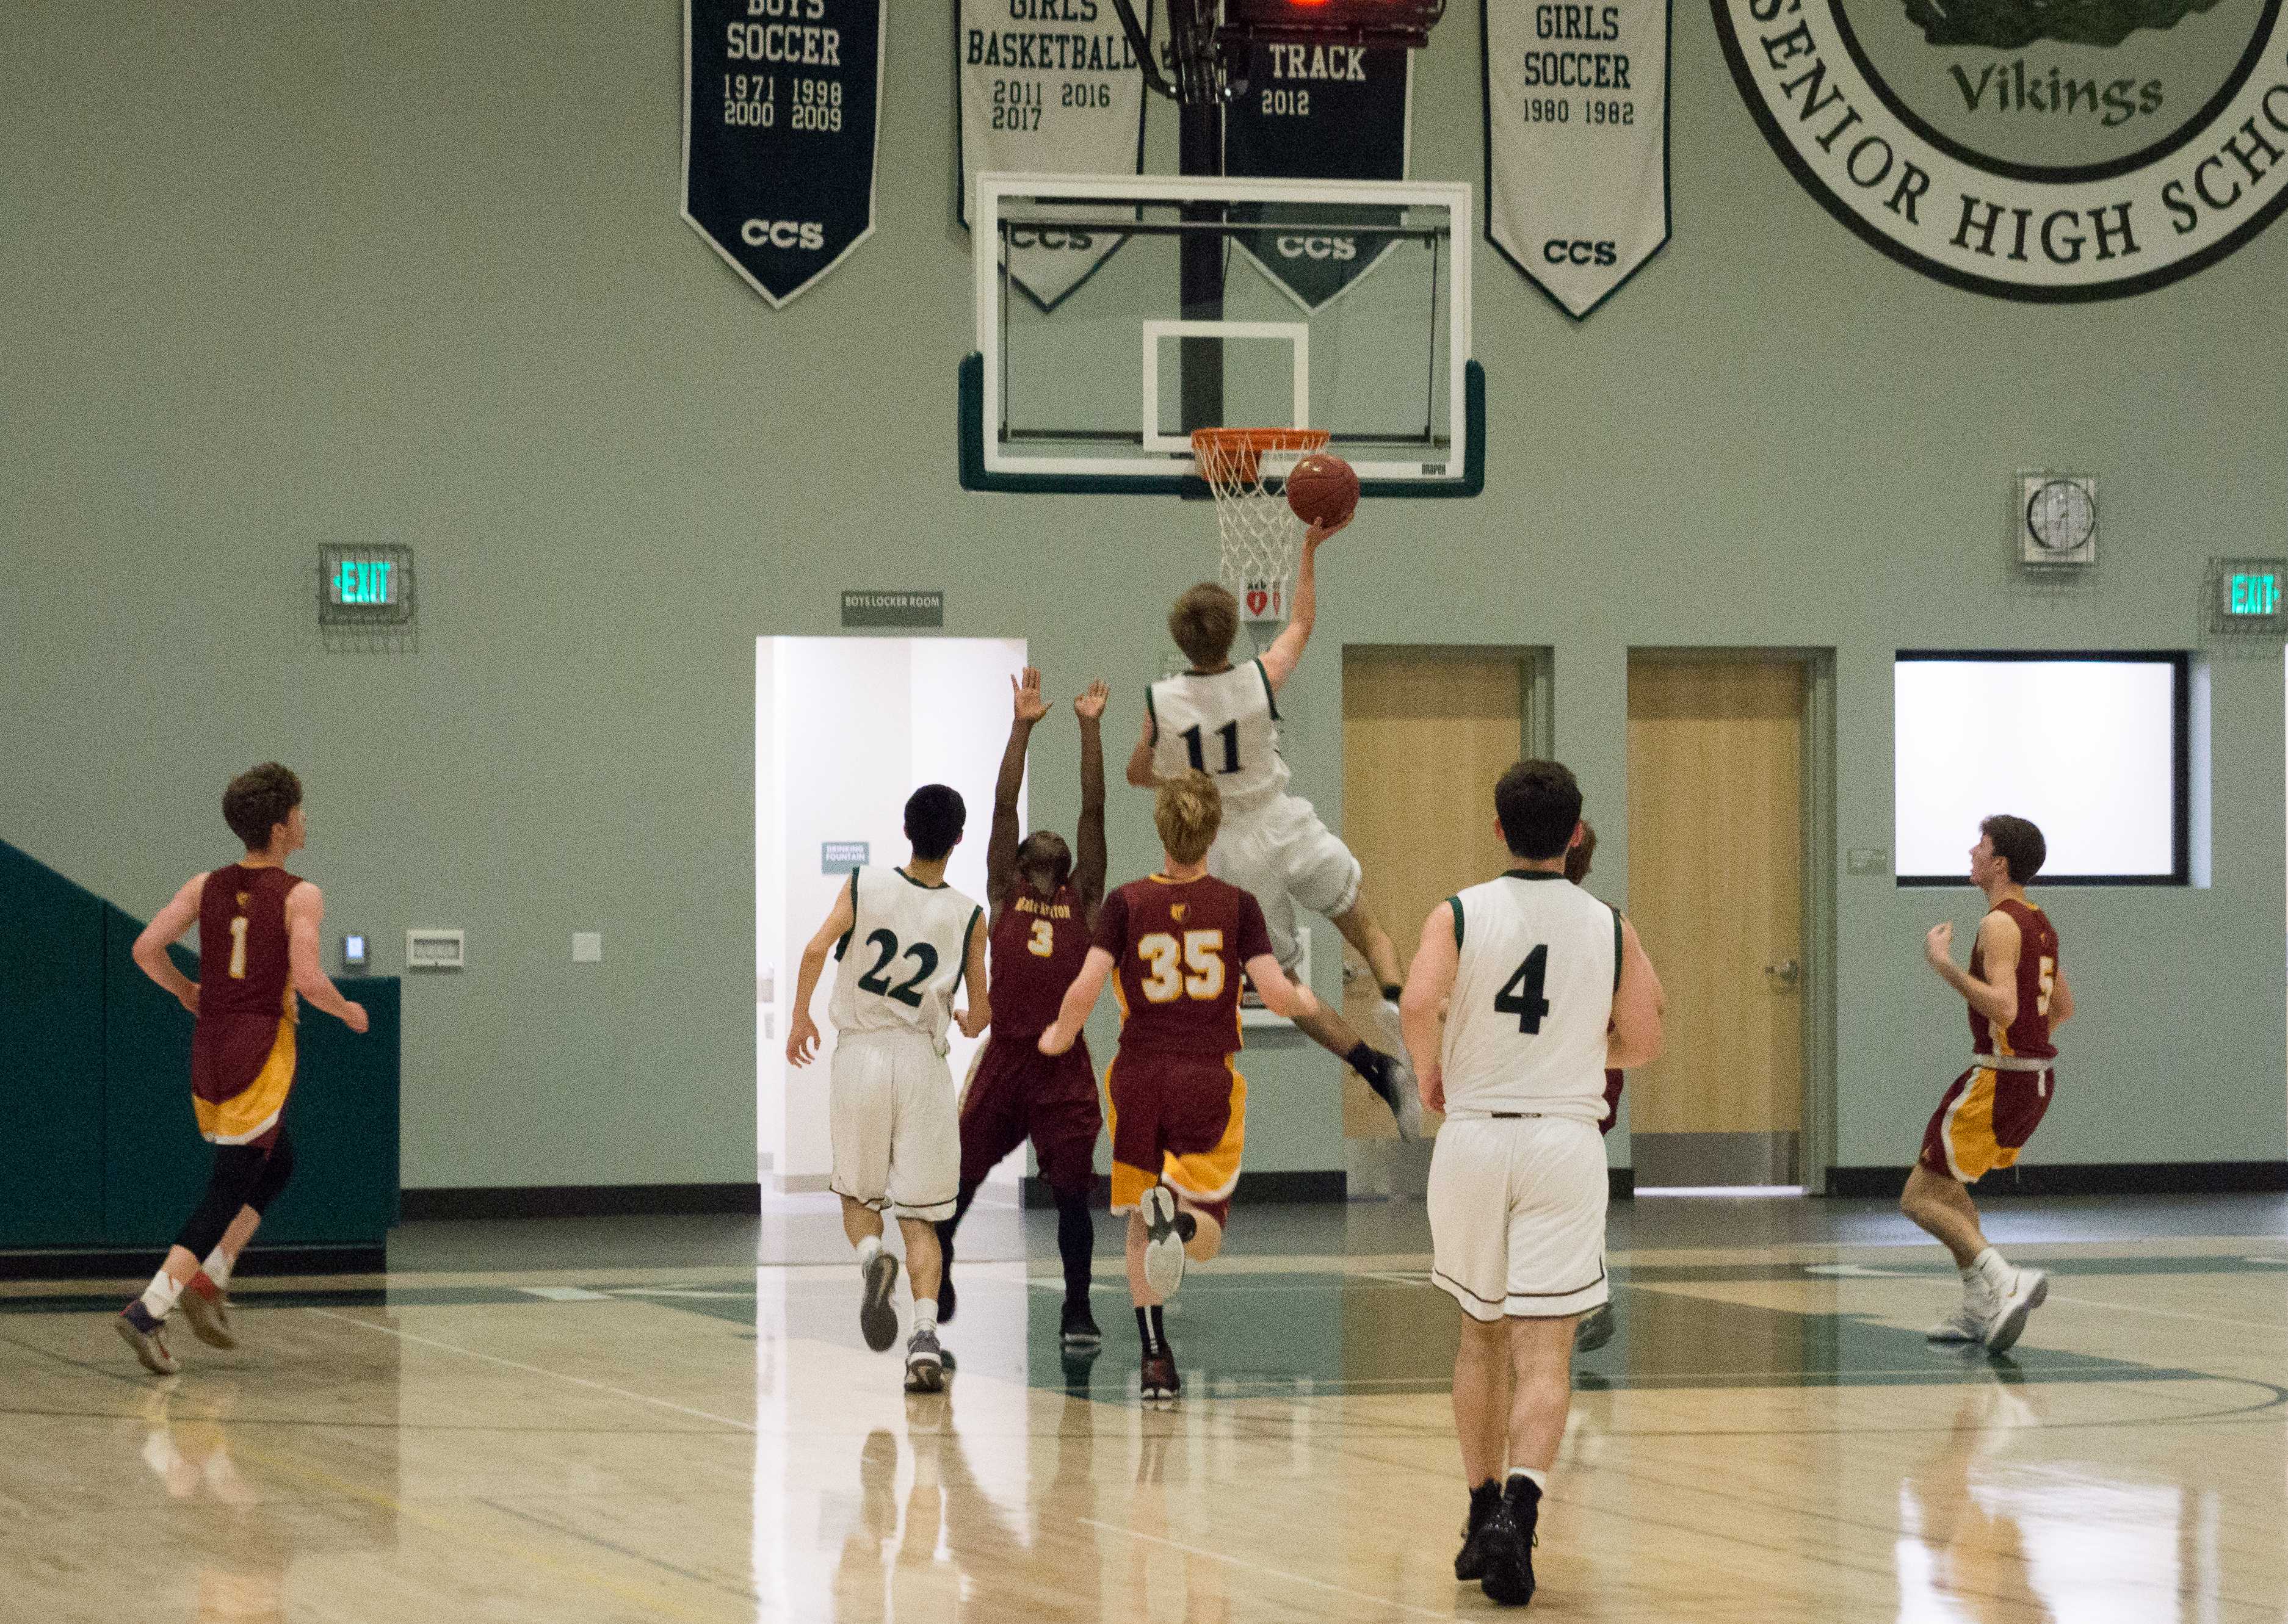 Senior forward Max Dorward, who led Paly with 17 points, shoots a layup over a defending Menlo-Atherton player. The Vikings played stout defense all night and attacked the paint on offense, resulting in a 57-41 win at the Peery Family Center. "We played our usual man defense and we bothered M-A’s rhythm on offense," head coach Peter Diepenbrock said. Photo: Finn Mennuti